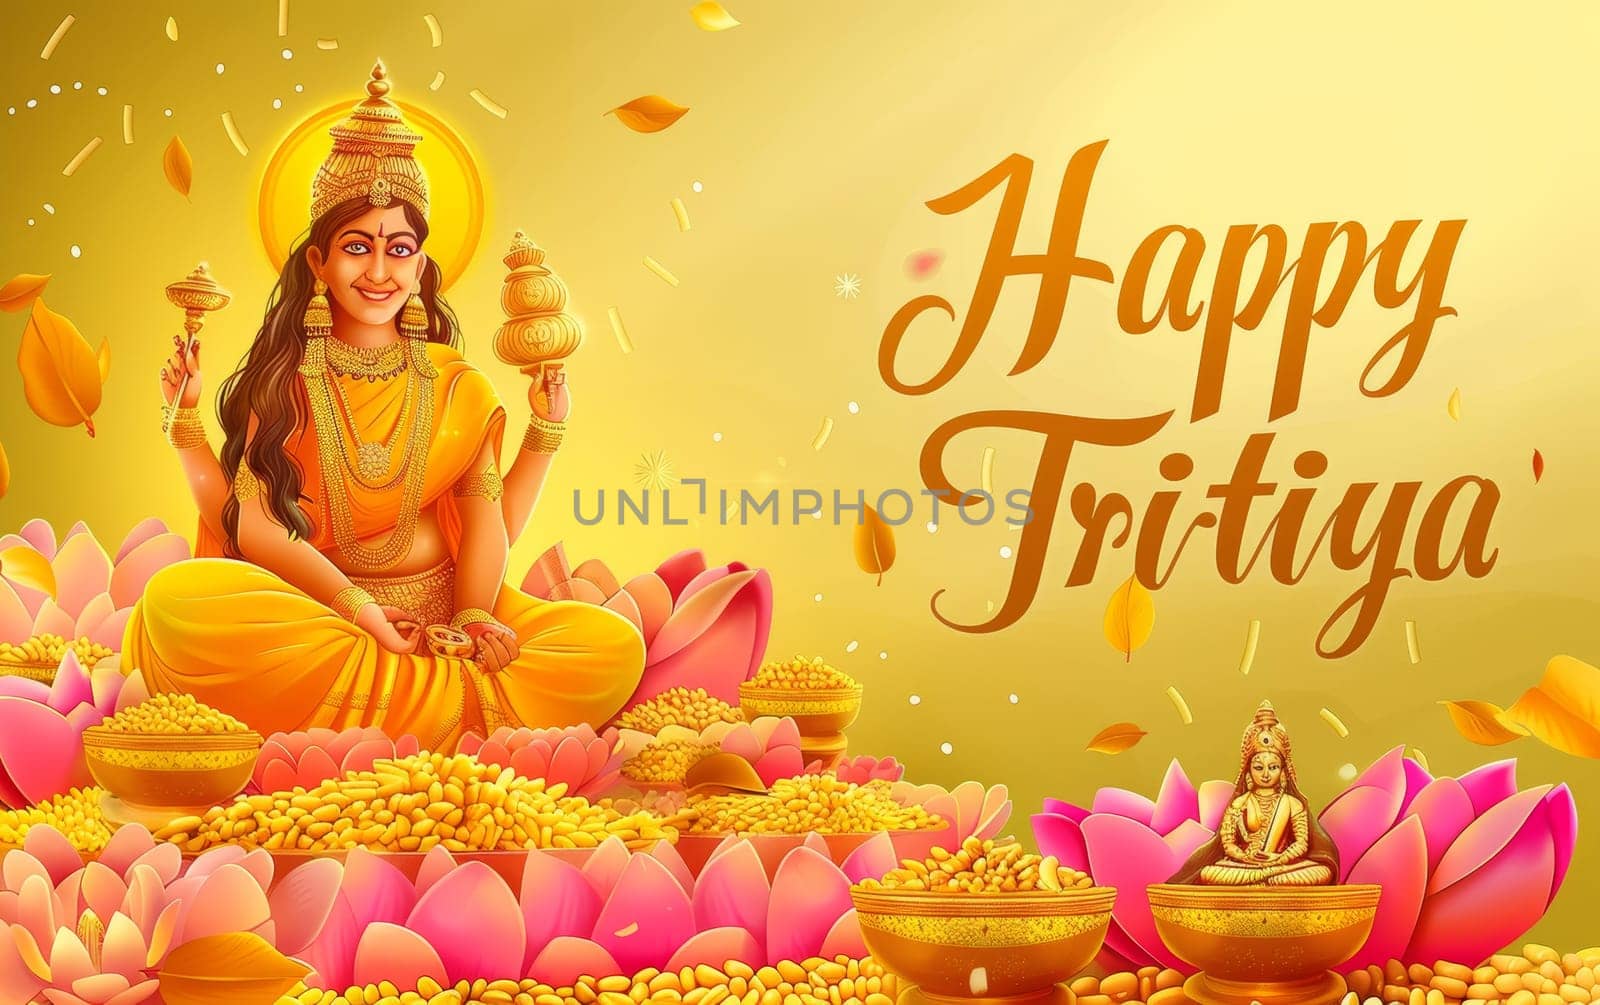 Bright and cheerful illustration for Akshaya Tritiya featuring Goddess Lakshmi with golden pots, surrounded by lotuses and grains. by sfinks